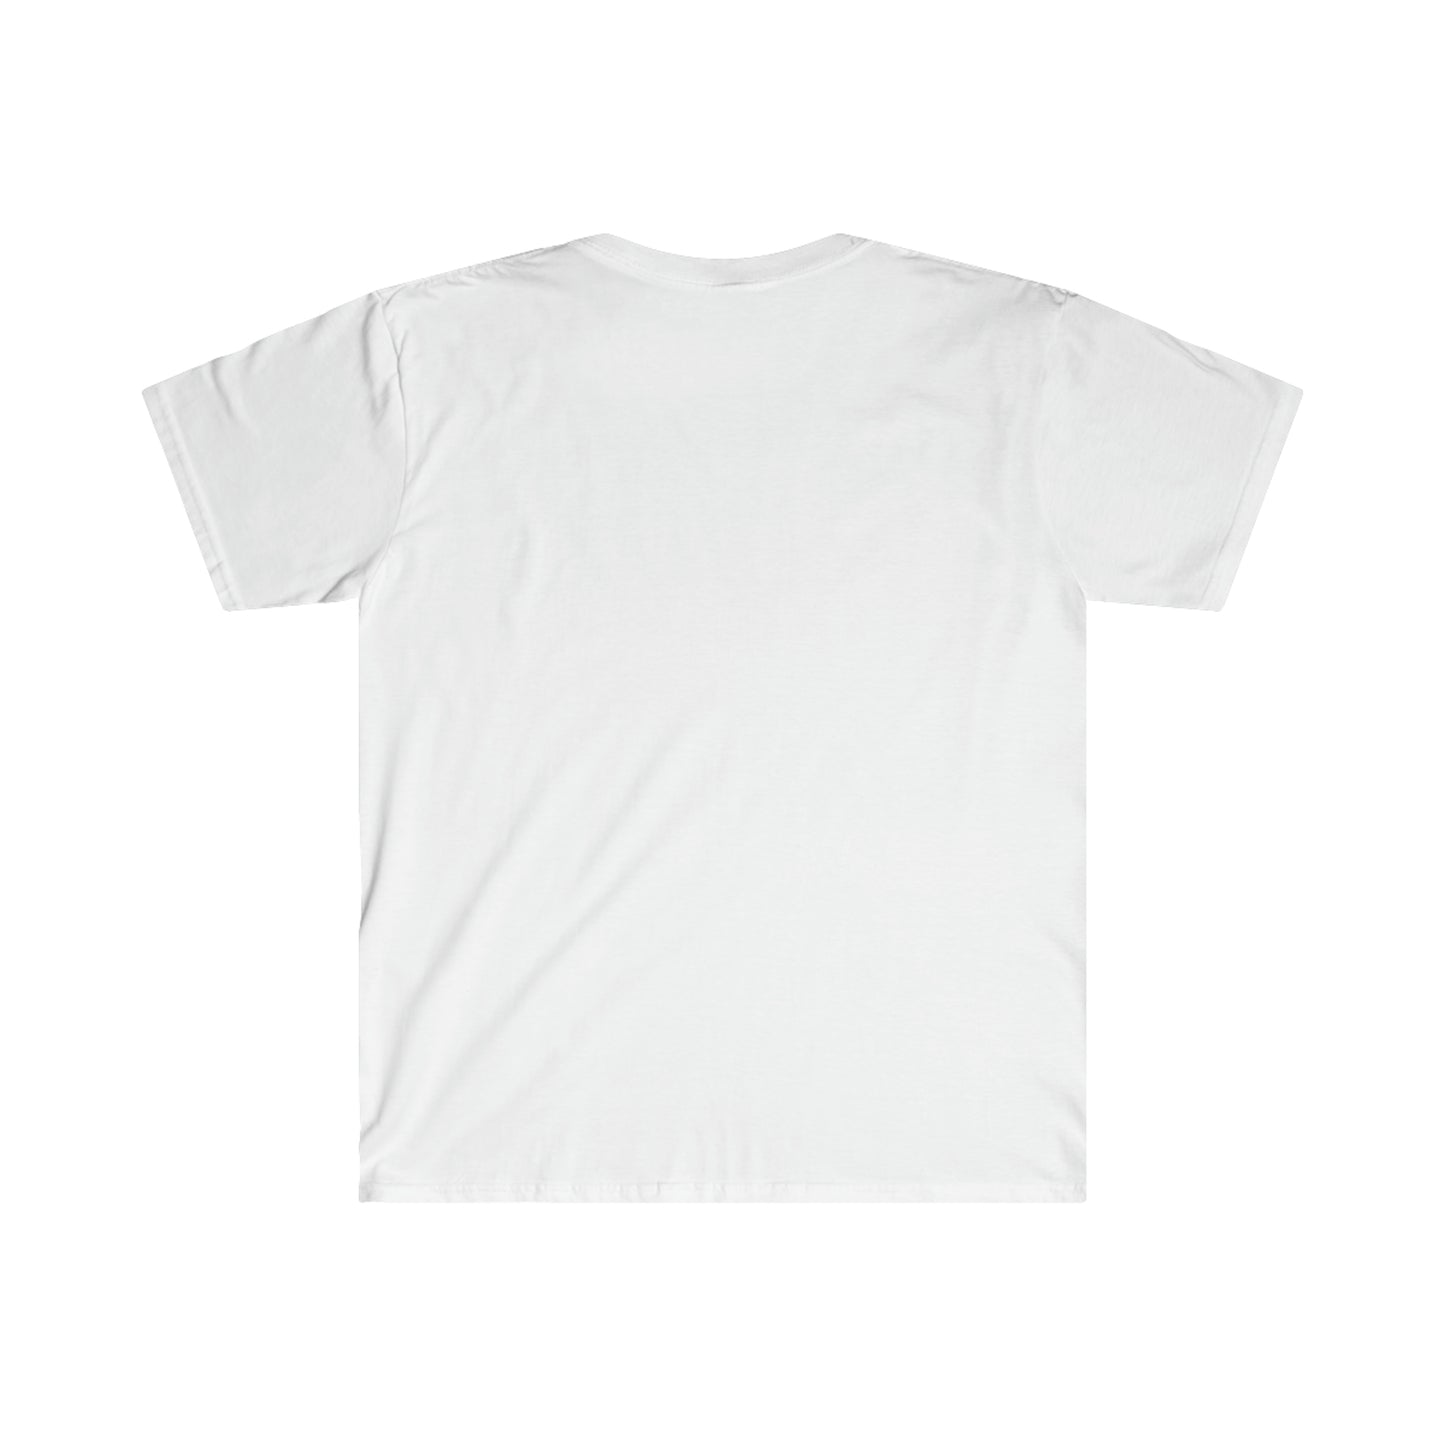 LIPS, The unisex soft-style t-shirt puts a new spin on casual comfort, 100% cotton for solid colors